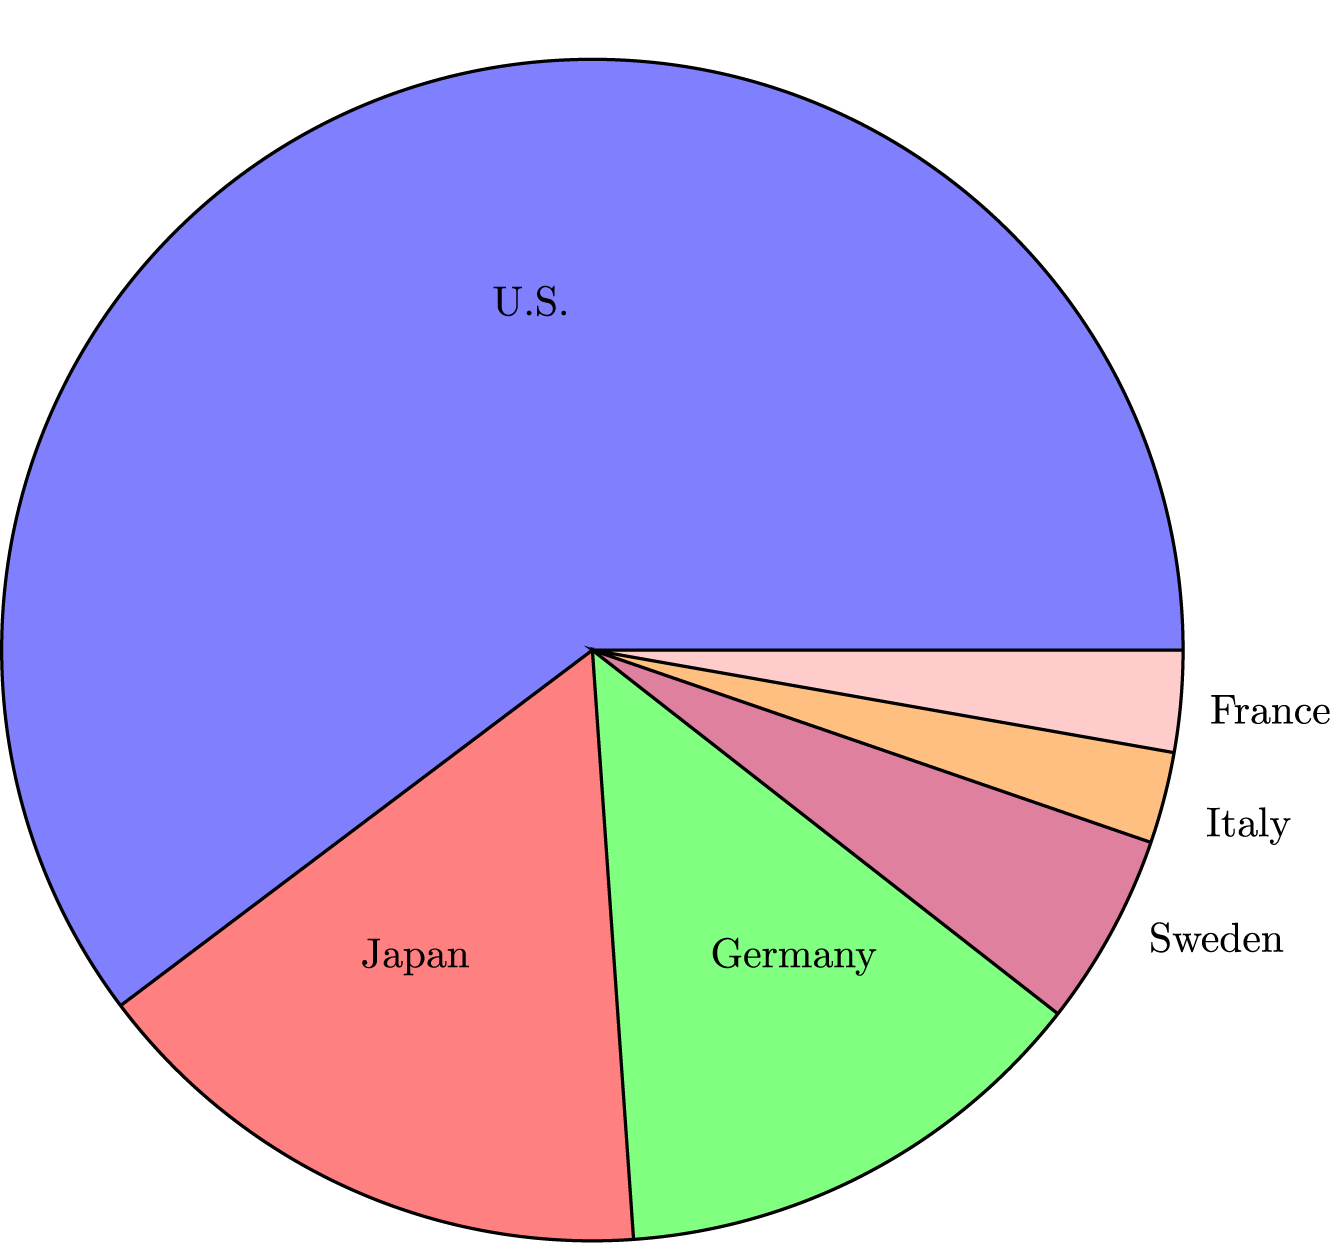 Pie chart of the number of cars tested per country. The U.S. is about 60% of the chart, Japan and Germany are about 15% of the chart each, followed by Sweden, Italy and France.